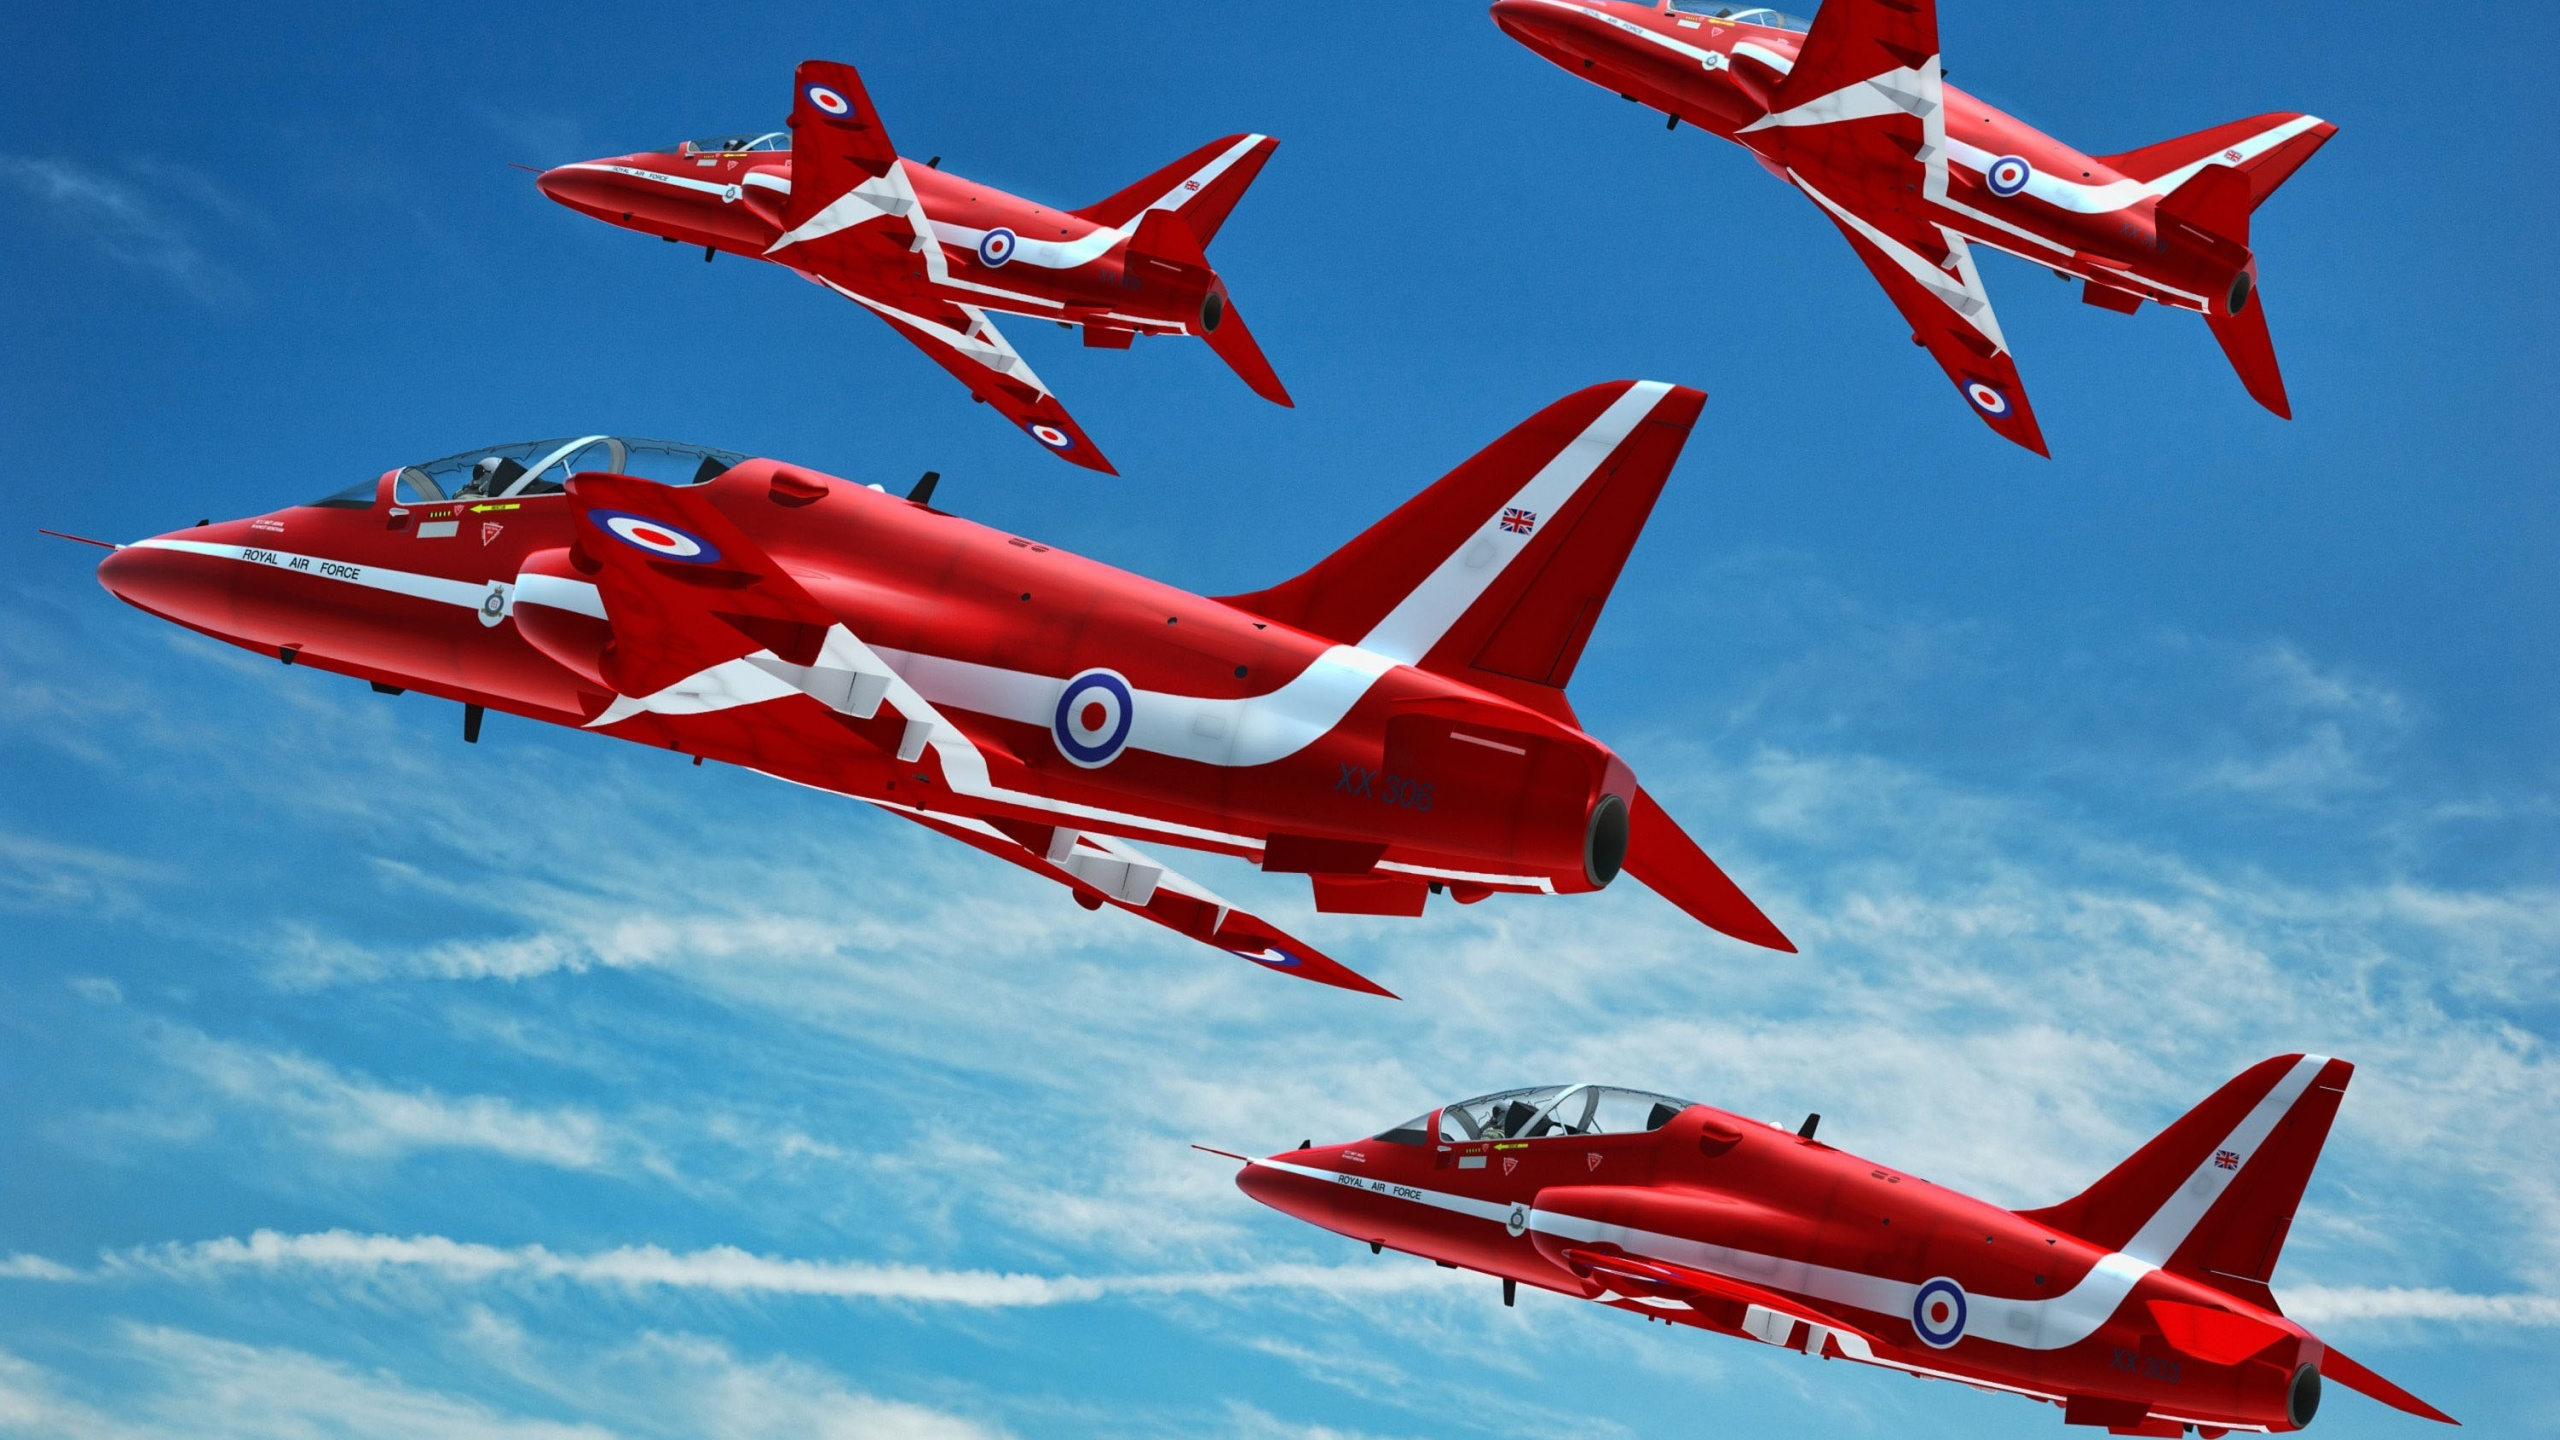 Red Jet Plane in Mid Air During Daytime. Wallpaper in 2560x1440 Resolution